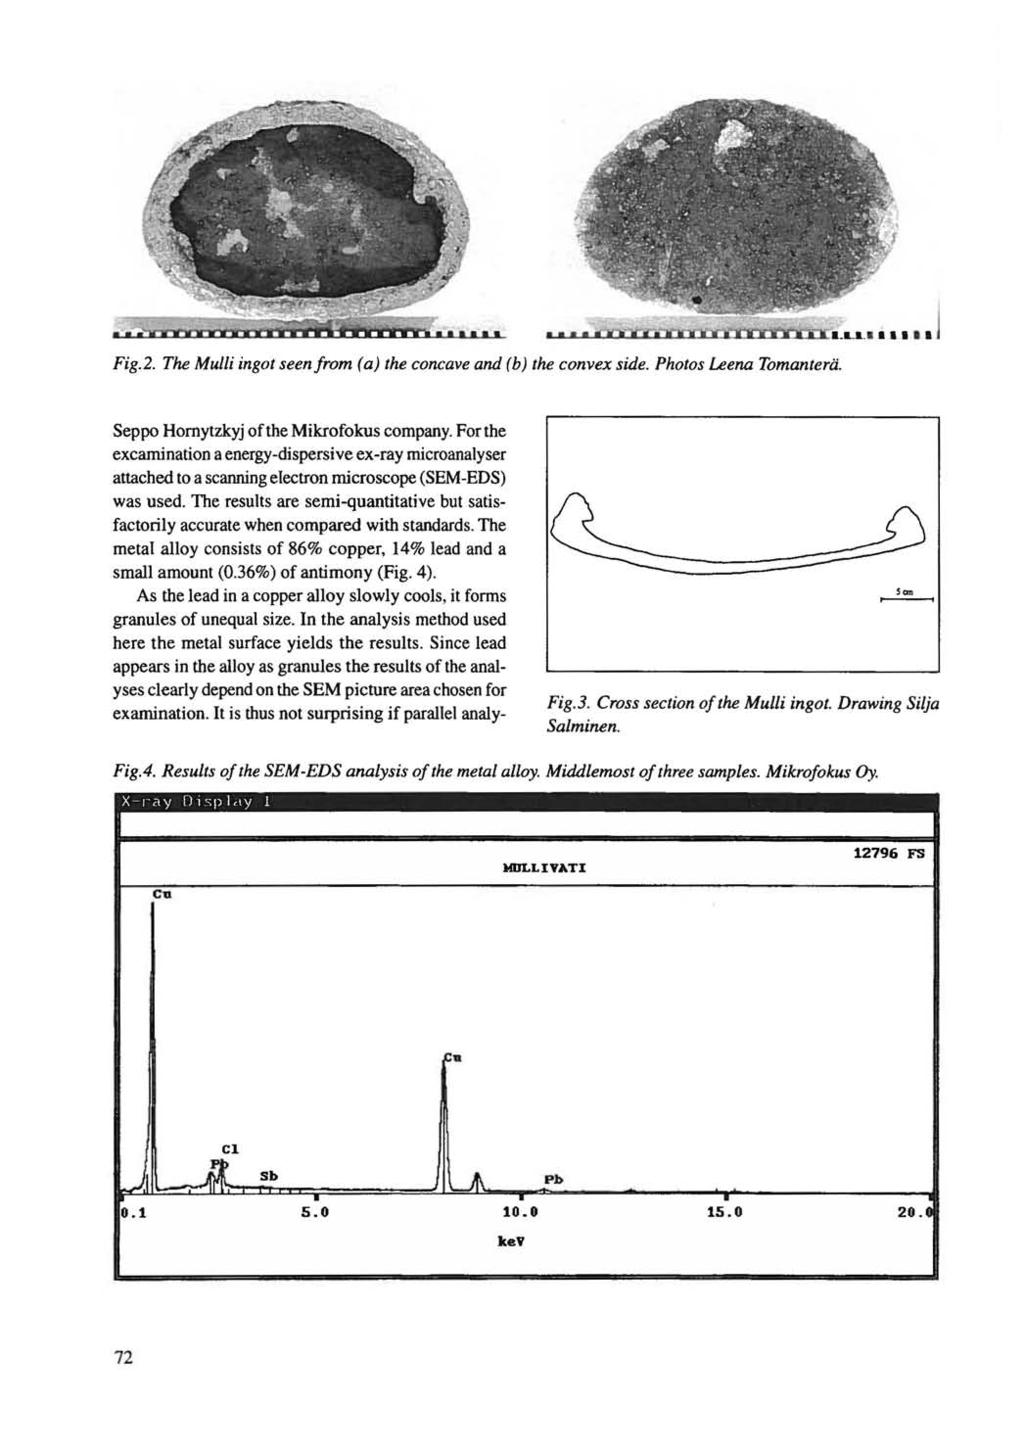 Fig. 2. The Mulli ingot seen from (a) the concave and (b) the convex side. Photos Leena Tomantera. Fig.3. Cross section of the Mulli ingot. Drawing Si/ja Salminen. Fig.4.